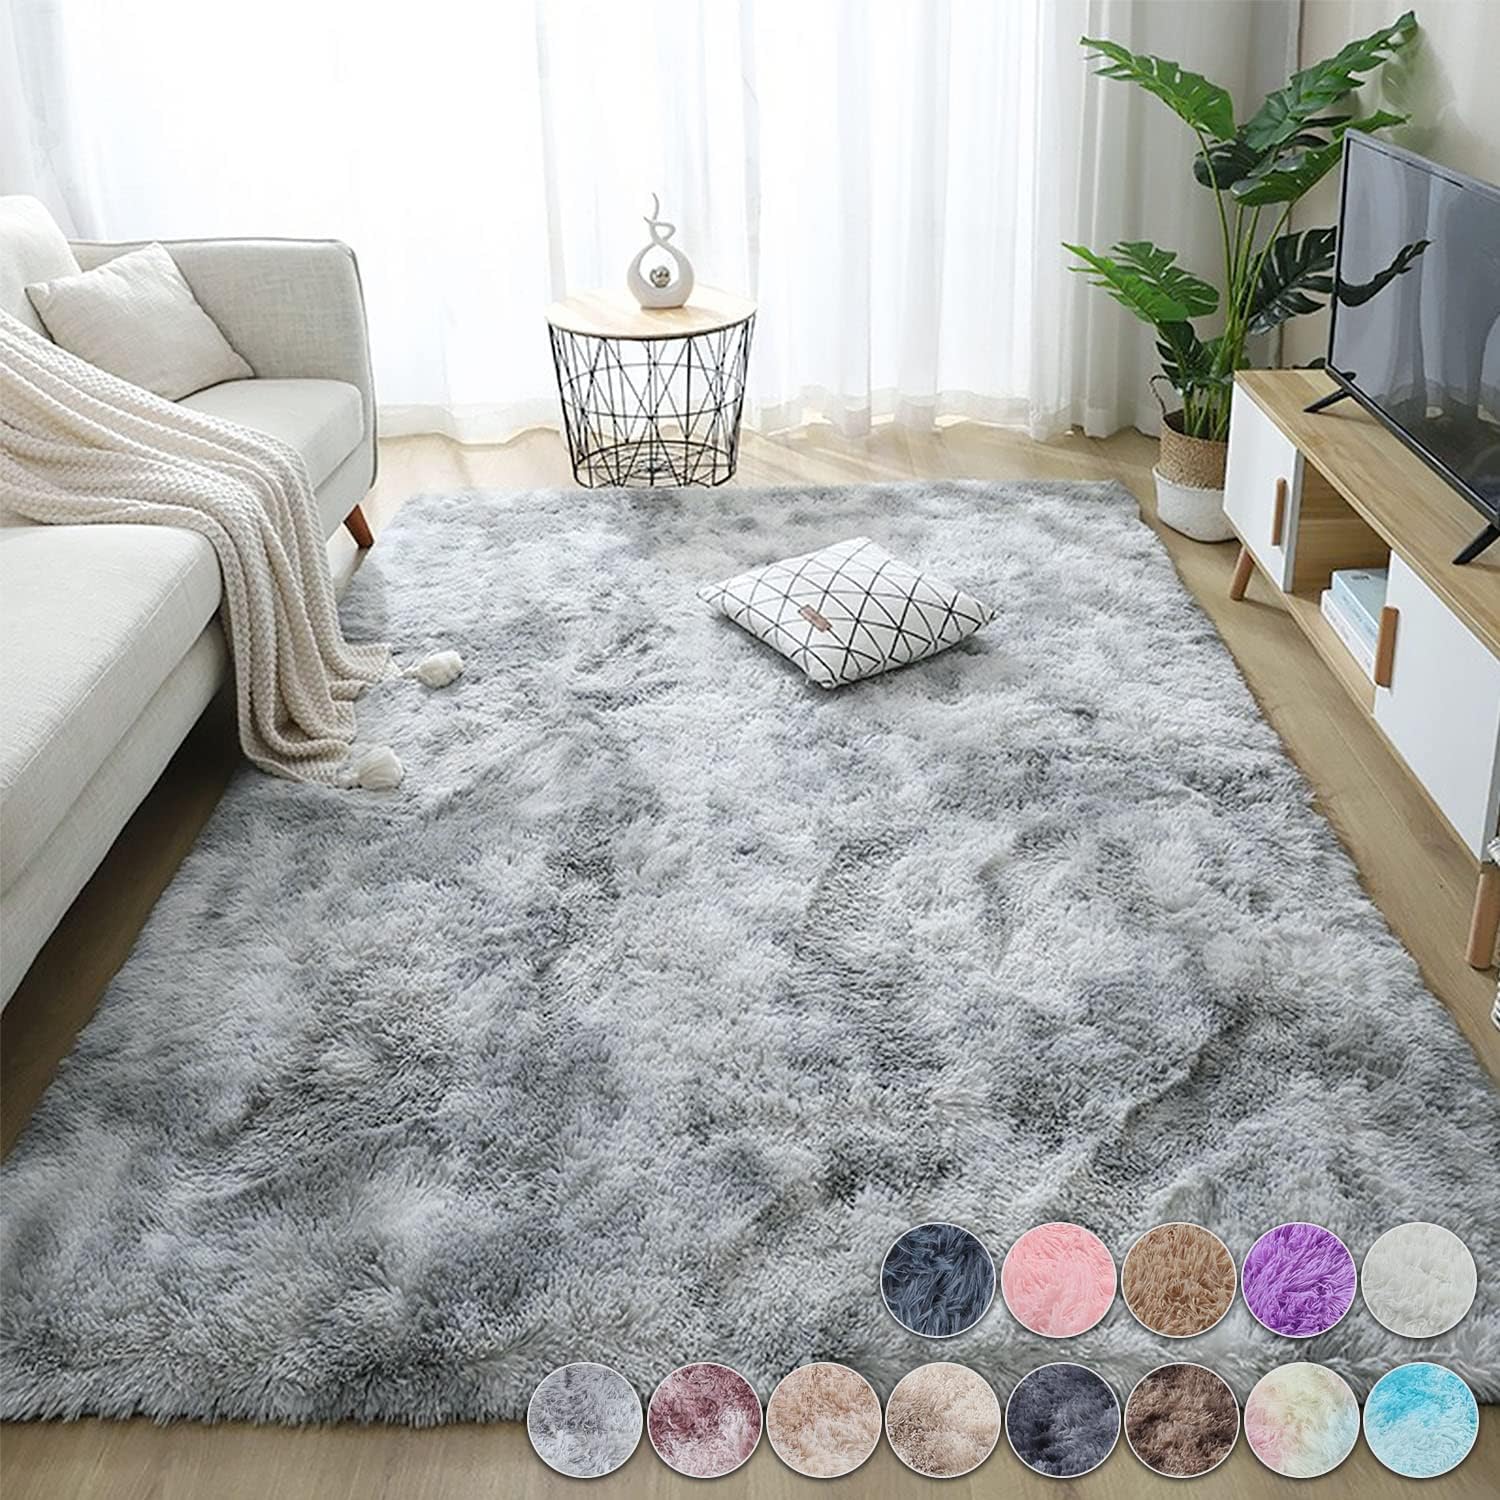 Great rug for dorm room or small area! Color as described and soft. Worth the price!